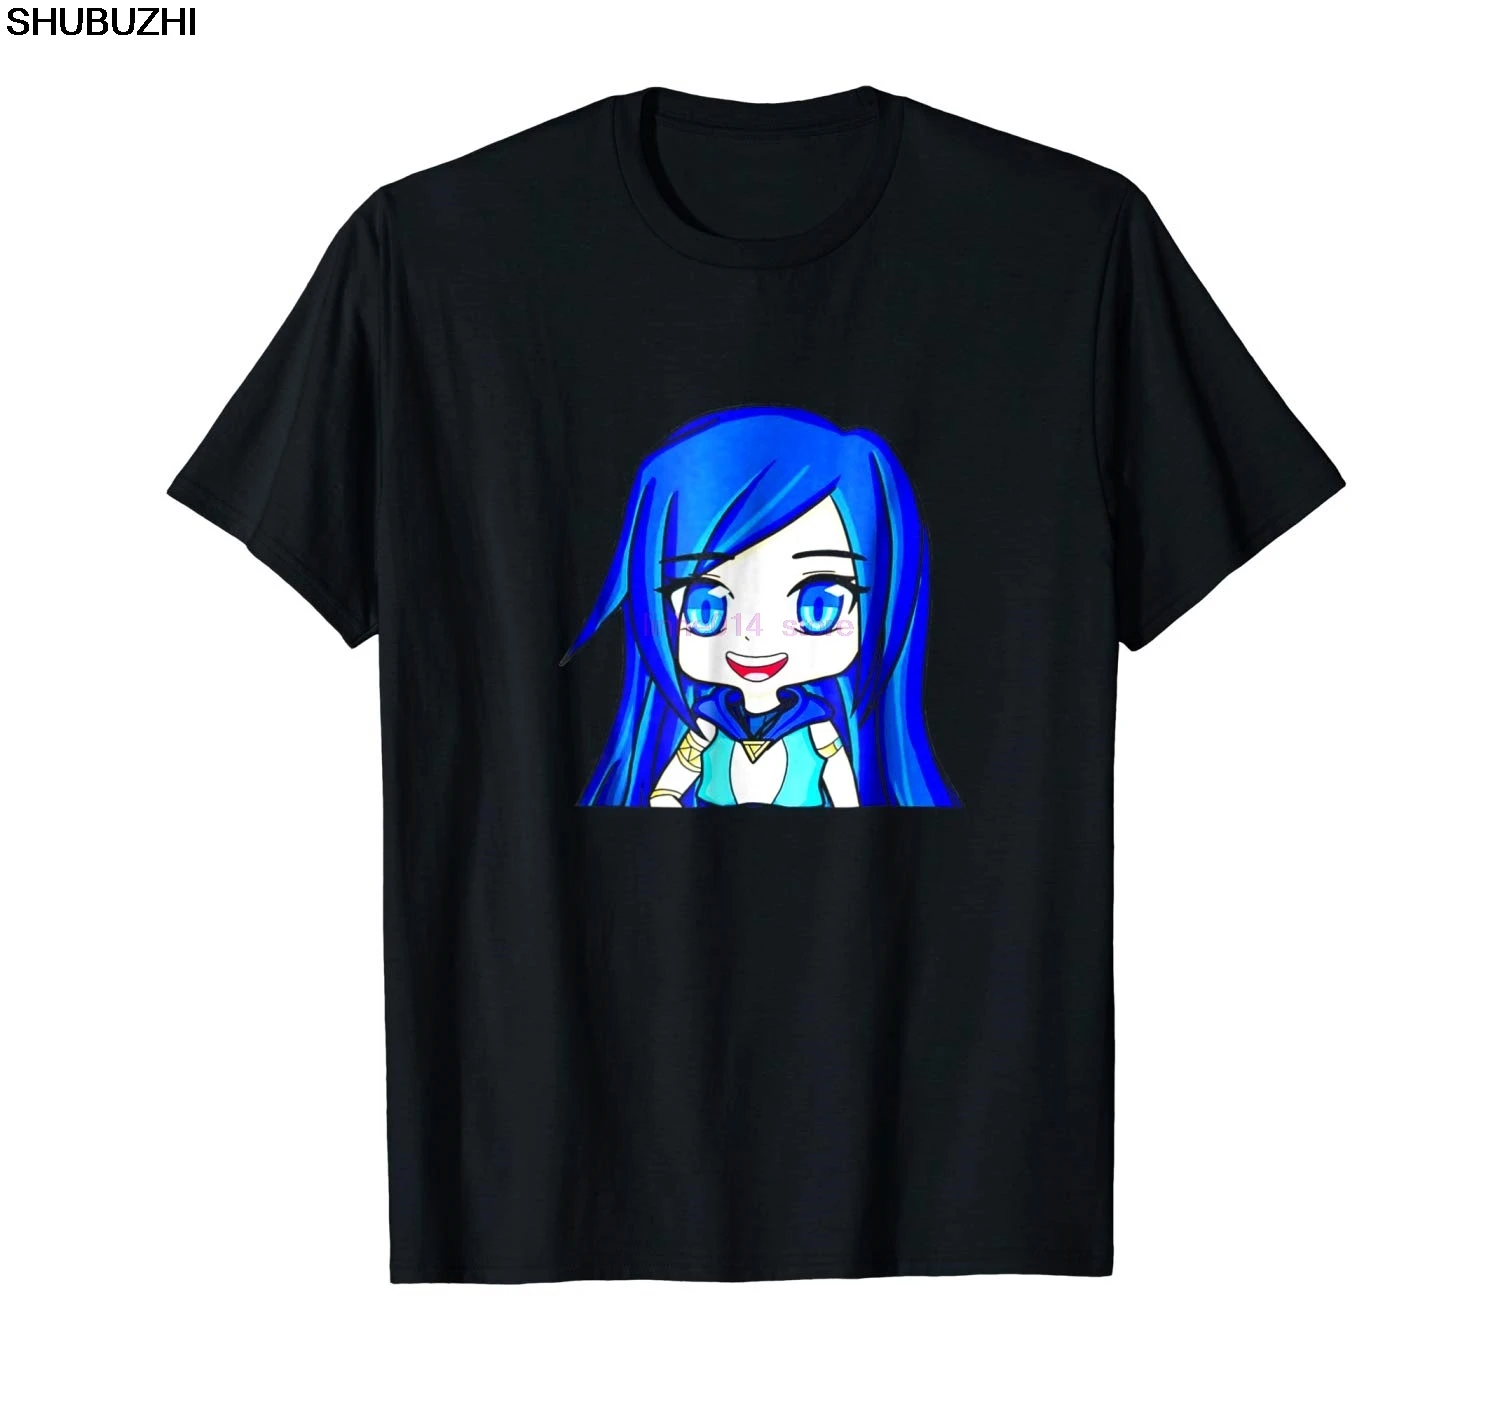 Funneh And The Krew Cartoon T Shirt Funneh Tshirt Work At A Pizza